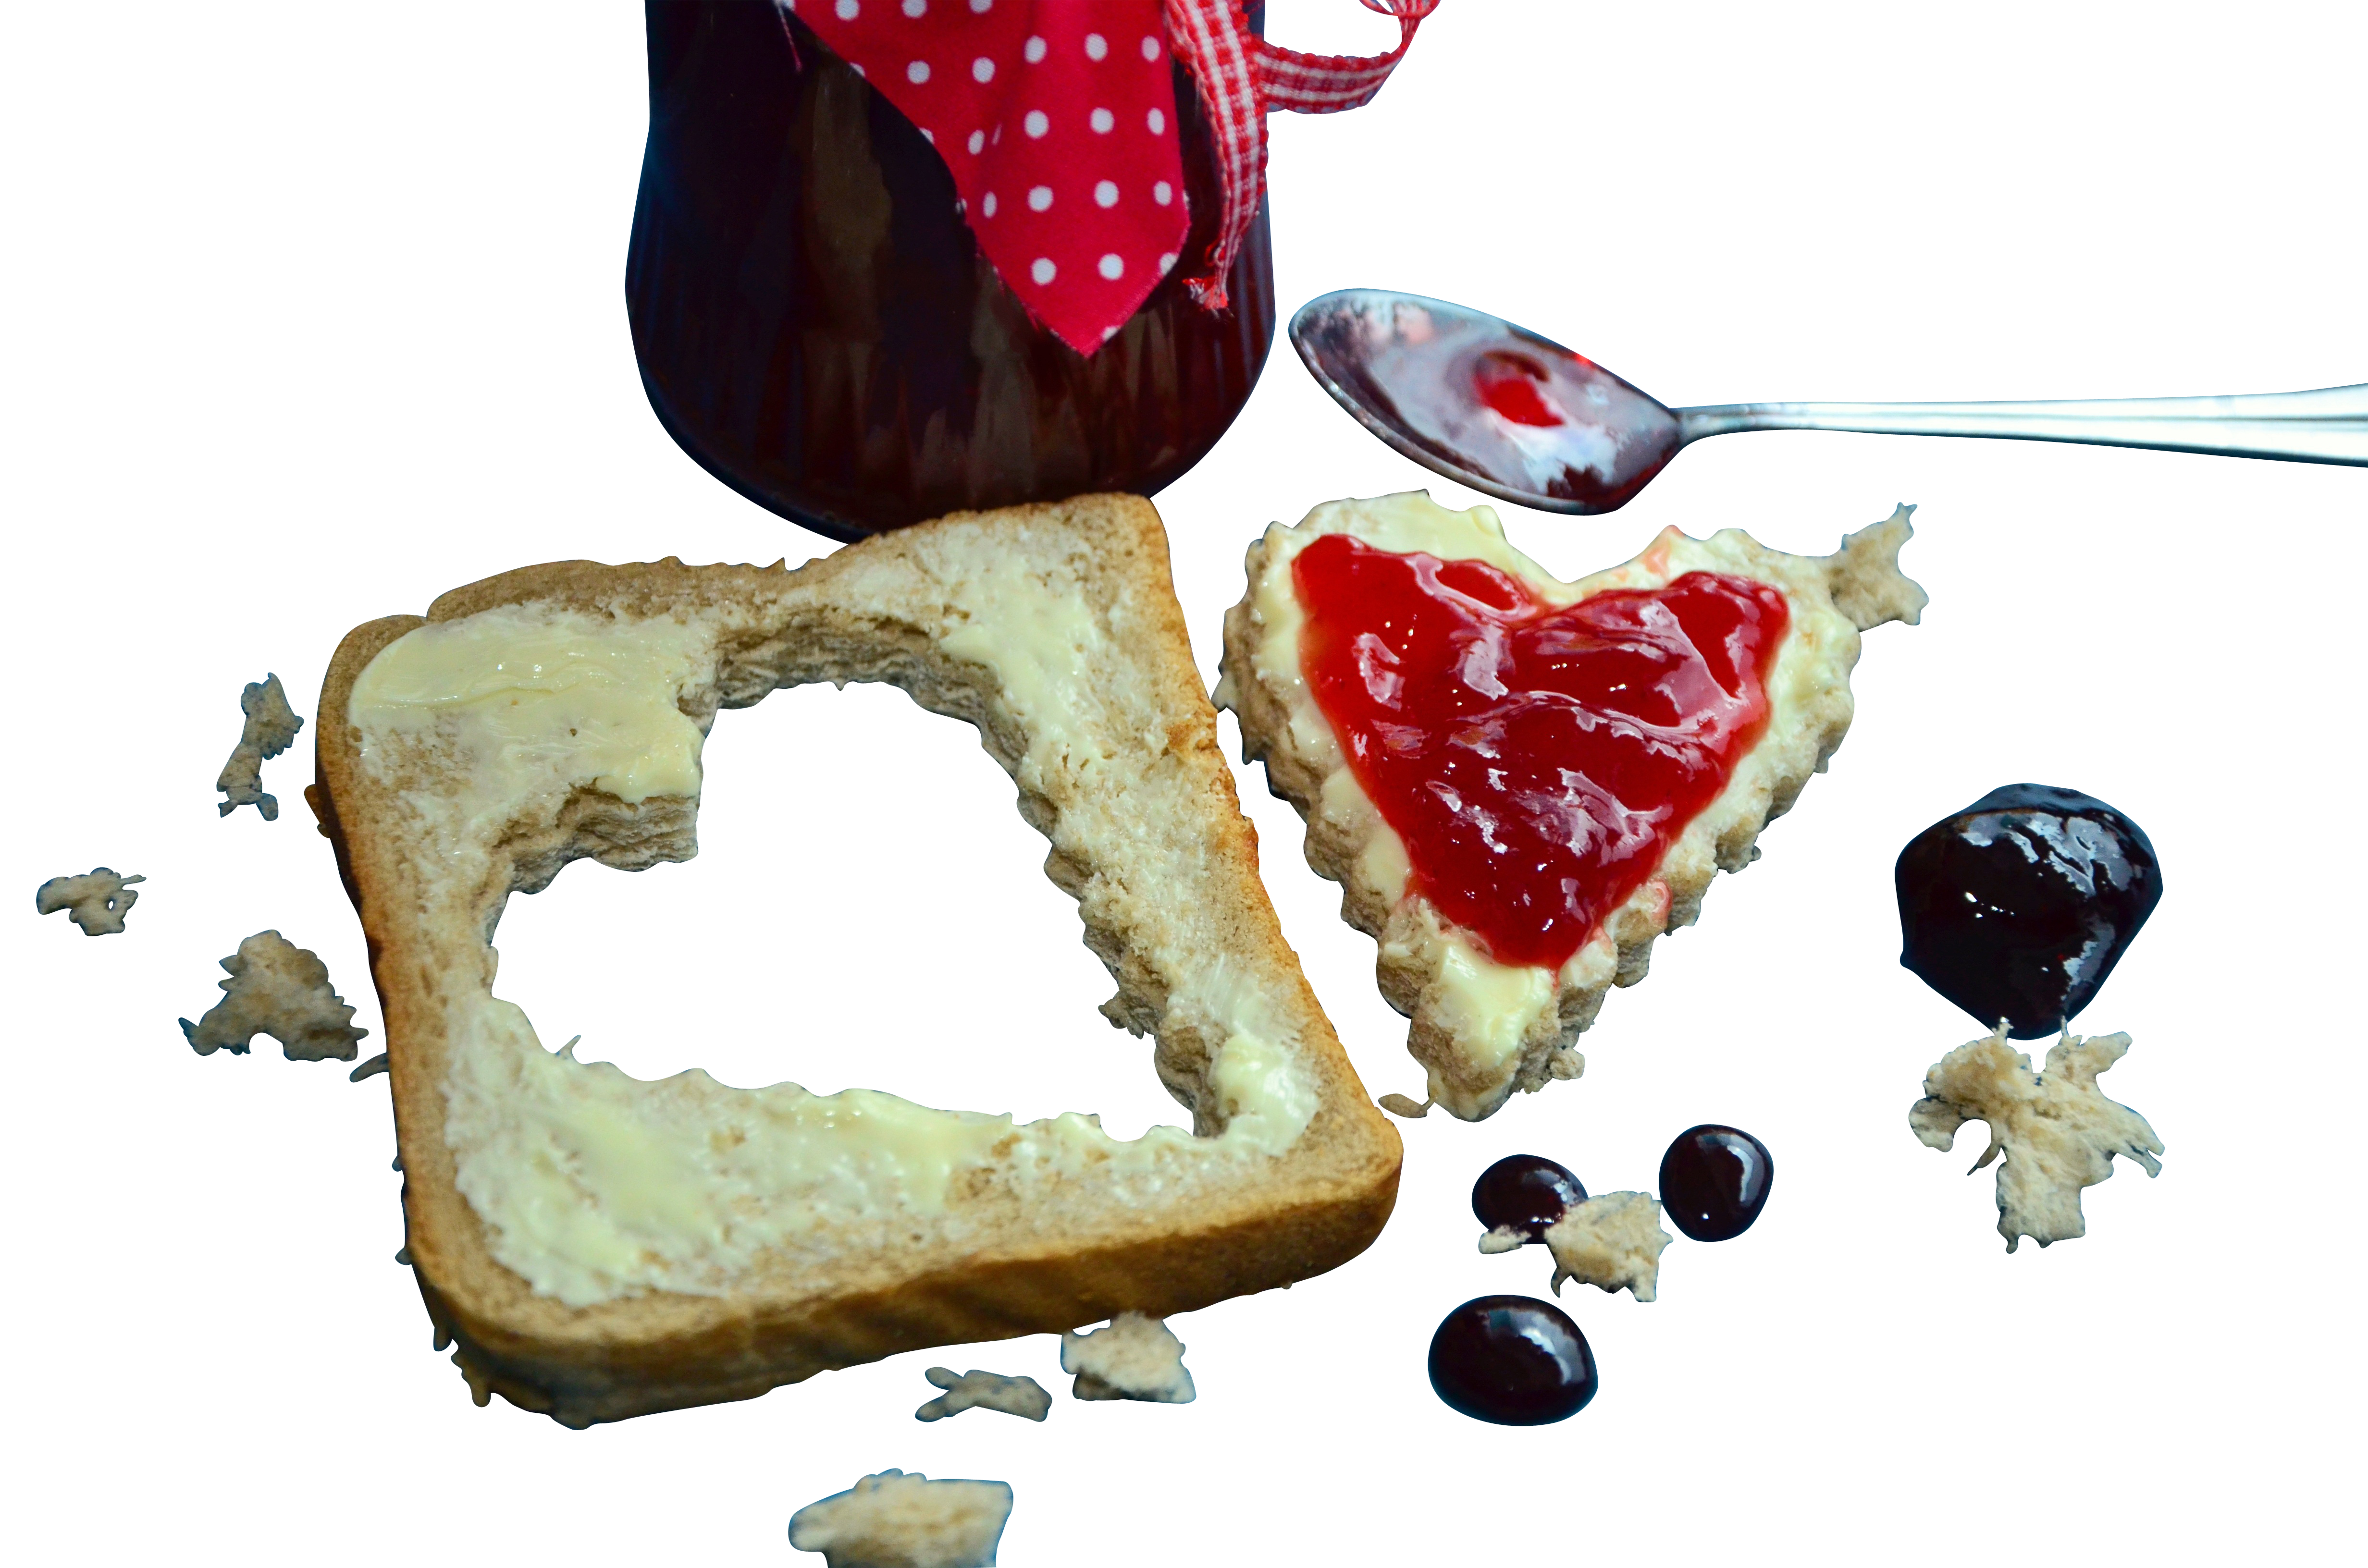 A Heart Shaped Bread With Jam On It